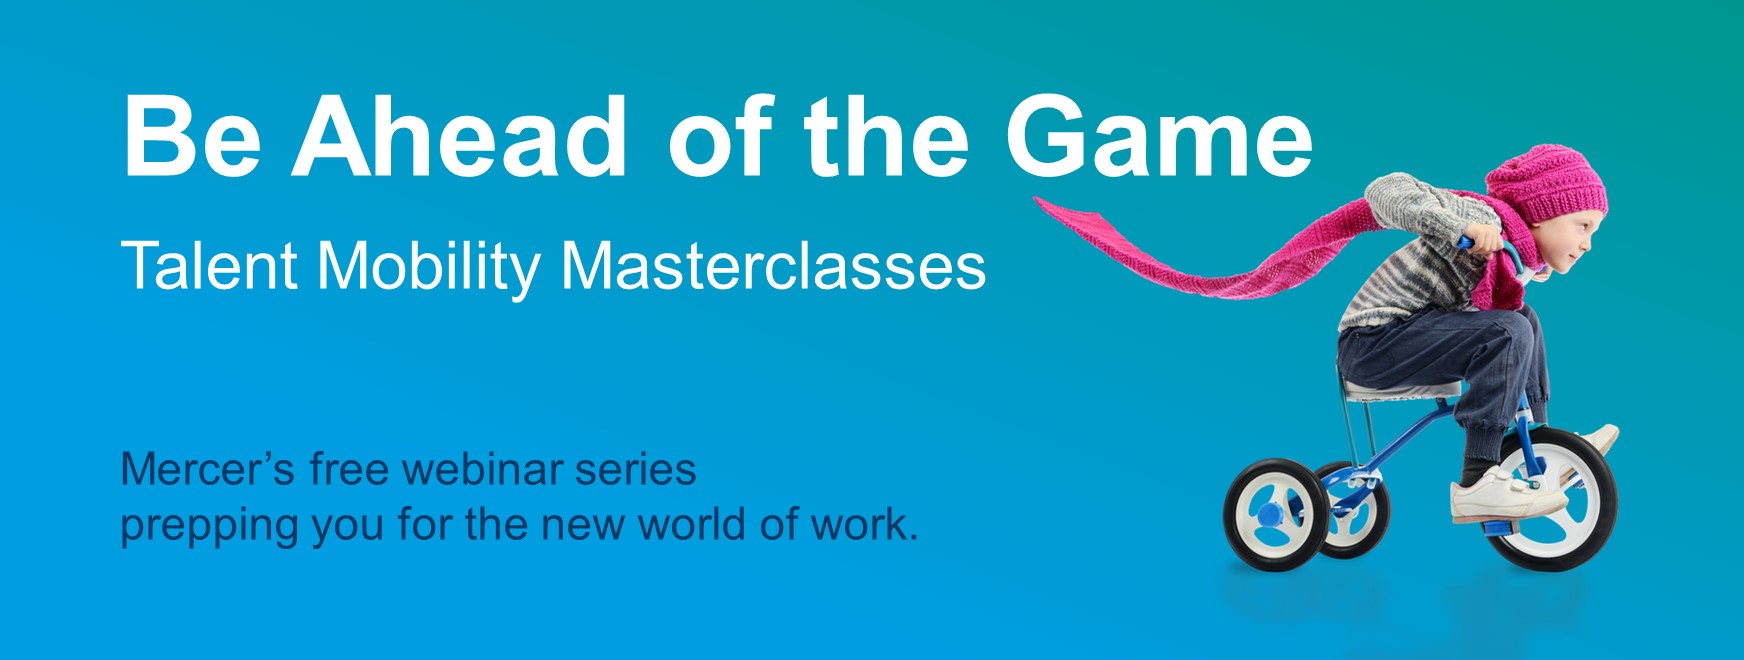 Promotional image for Talent Mobility Masterclasses webcast series